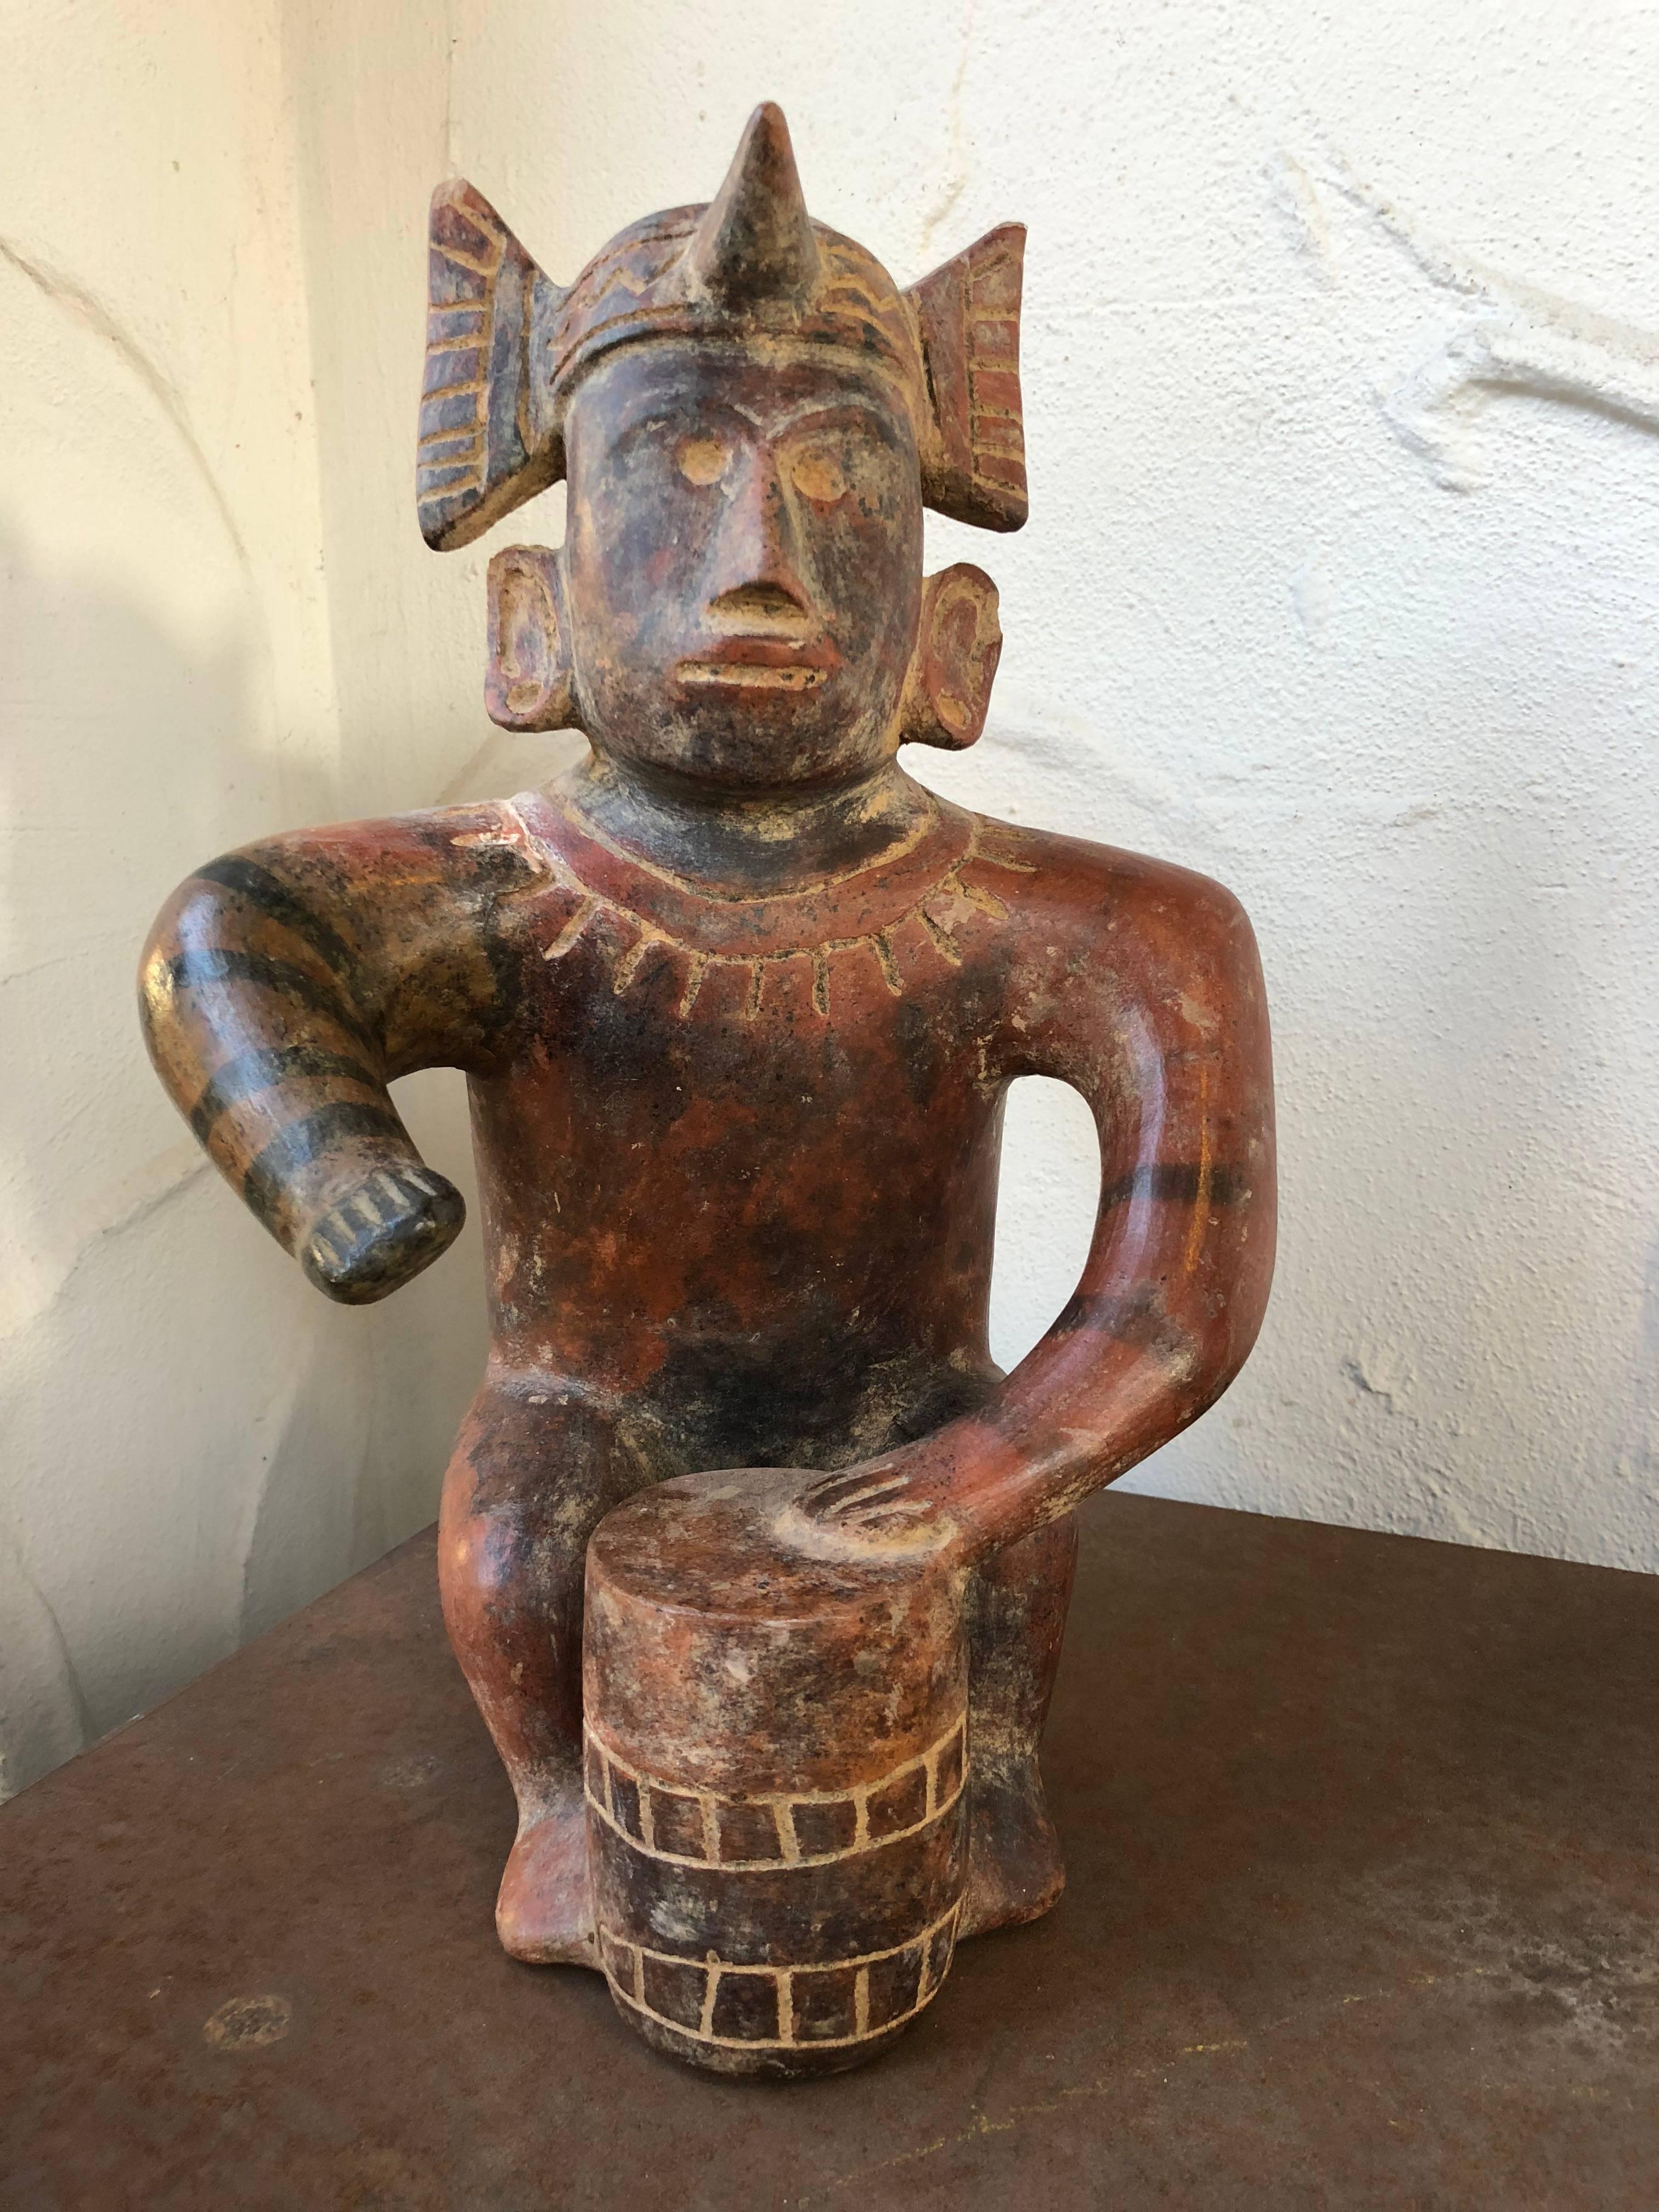 Provenance: Sothebys, NY
In excellent overall condition for its age.

Colima, located on Mexico's southwestern coast, was during this time part of the shaft tomb culture, along with neighbors to the north in Jalisco and Nayarit. In this culture,